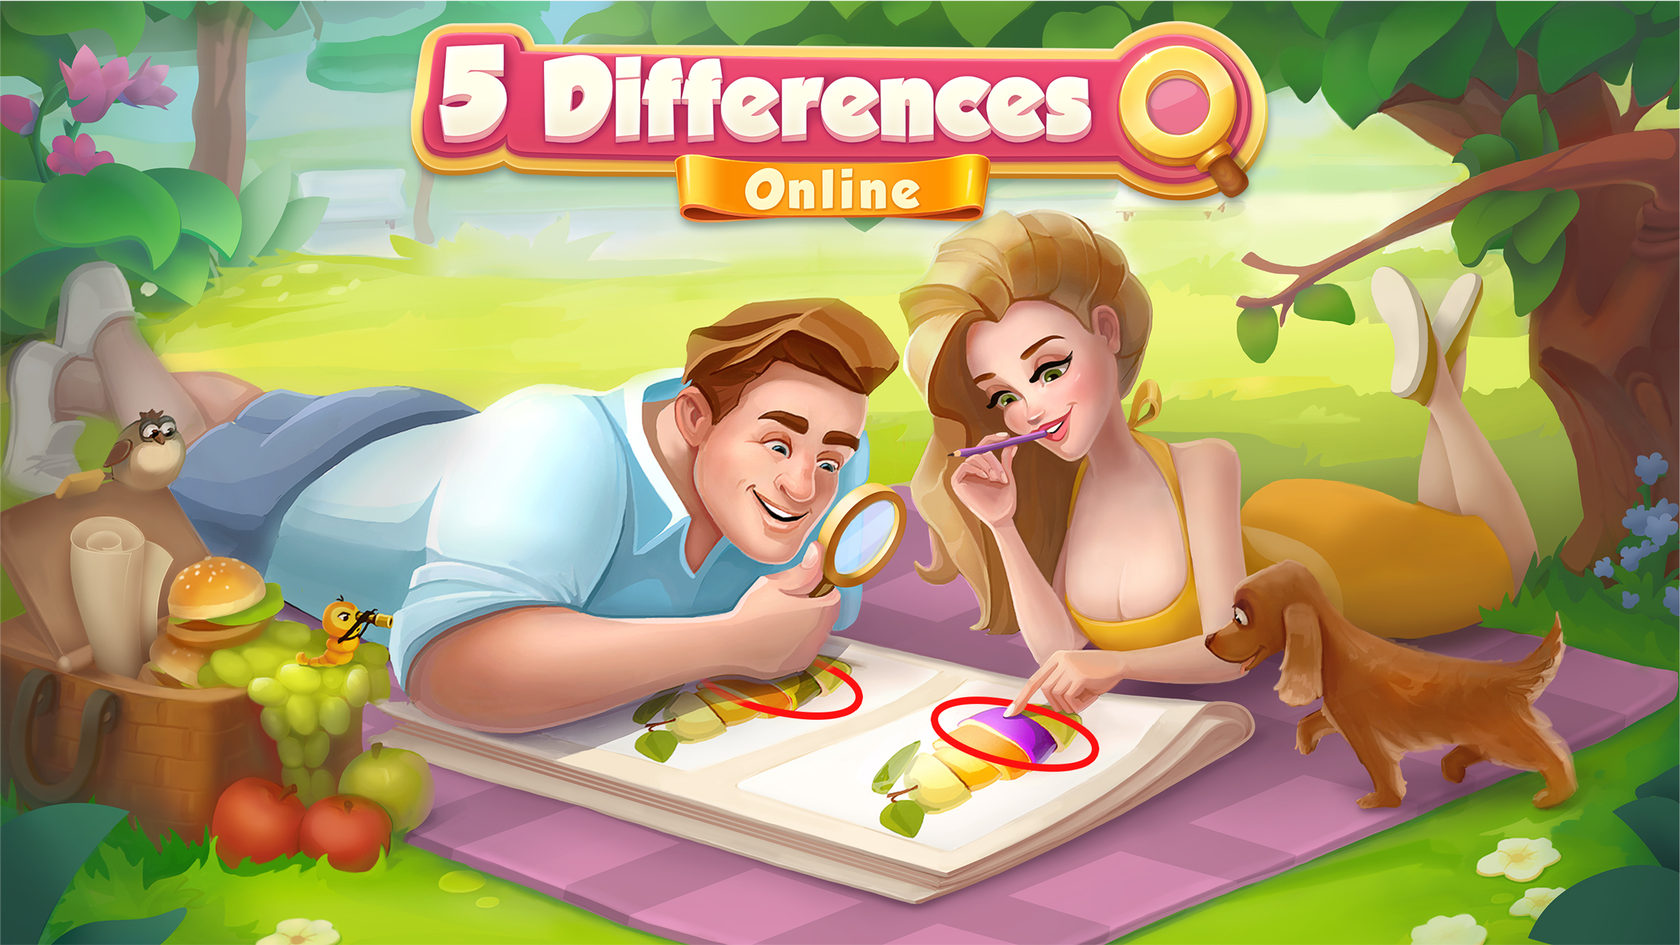 5 differences online answers level 25